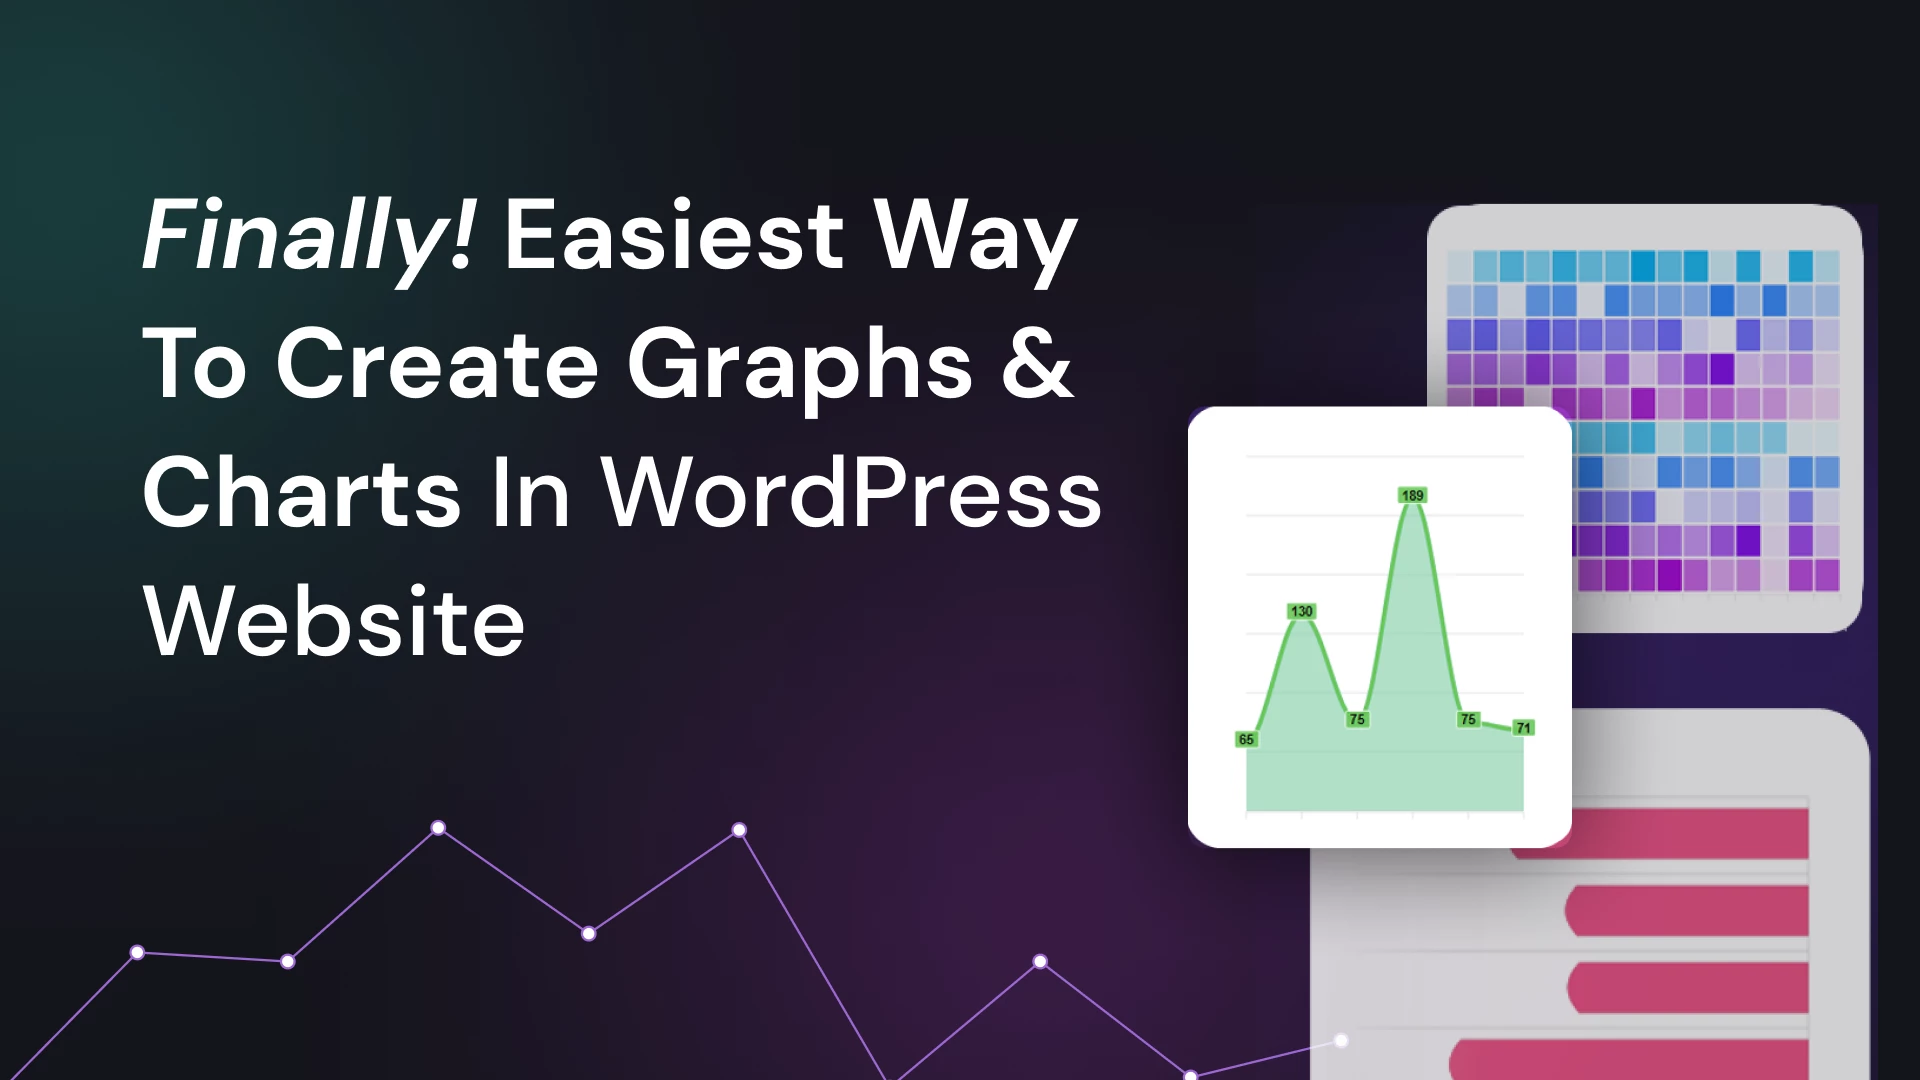 Finally! Easiest way to create Graphs & Charts in WordPress Website | Iqonic Design finally! easiest way to create graphs and charts in wordpress website Finally! Easiest Way to Create Graphs and Charts in WordPress Website 133894 Frame 54